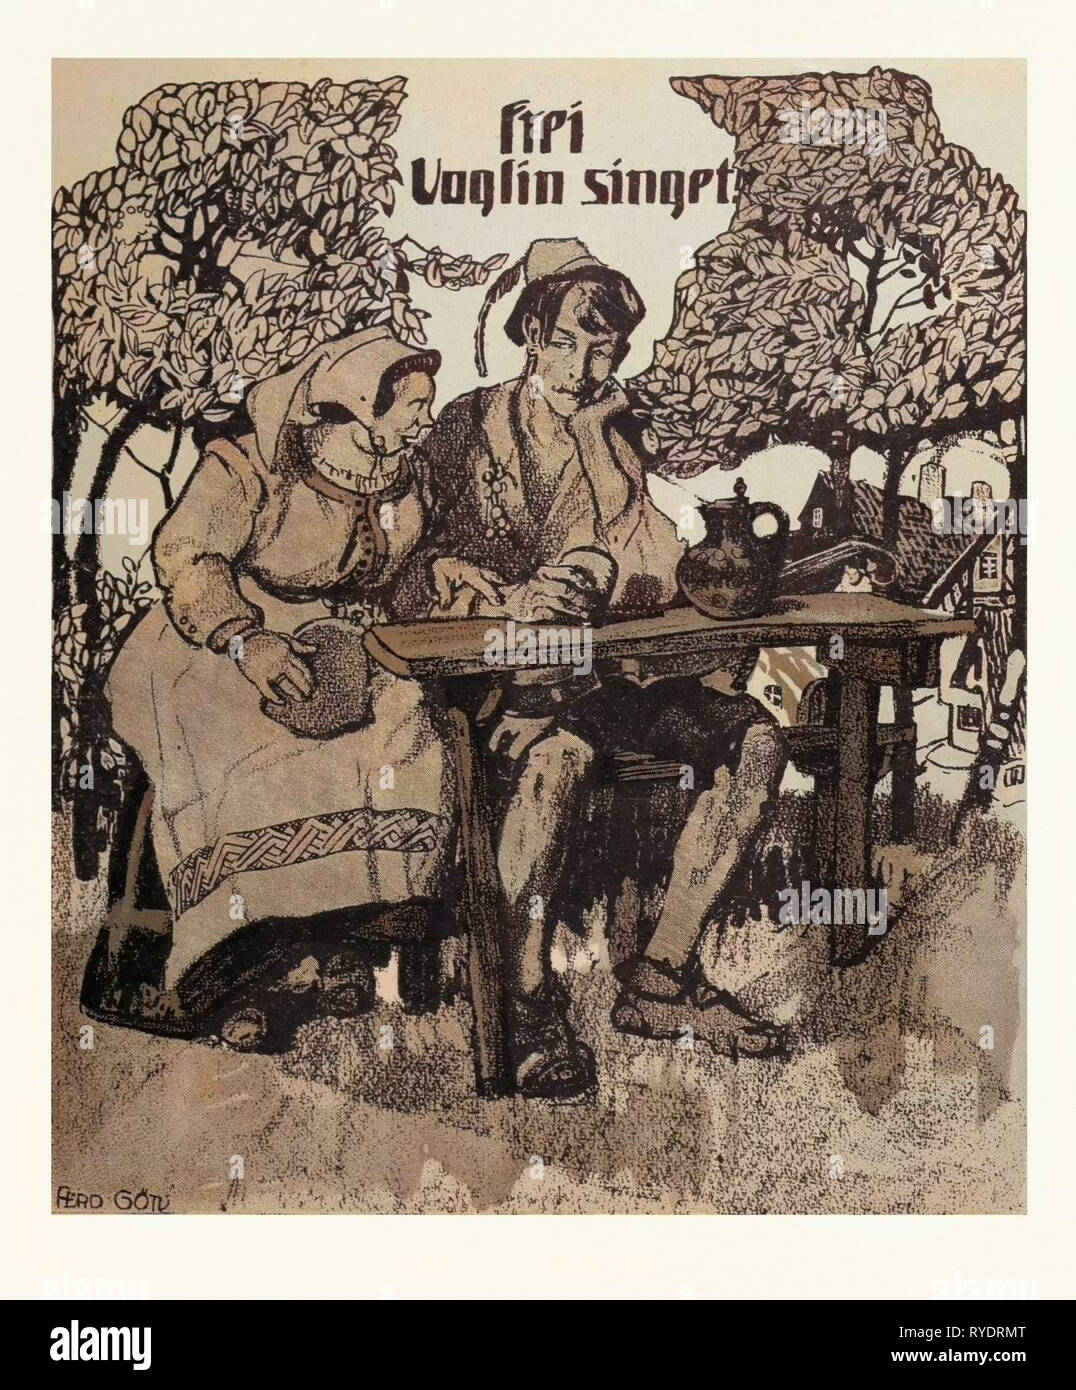 Frei Voglin Singet. In the Garden, Drinking, Man, Woman, Outdoors, Folk Dress, Talking, Food and Drink, Liszt Gourmet Archive, Bench, Table, Trees, Green Stock Photo